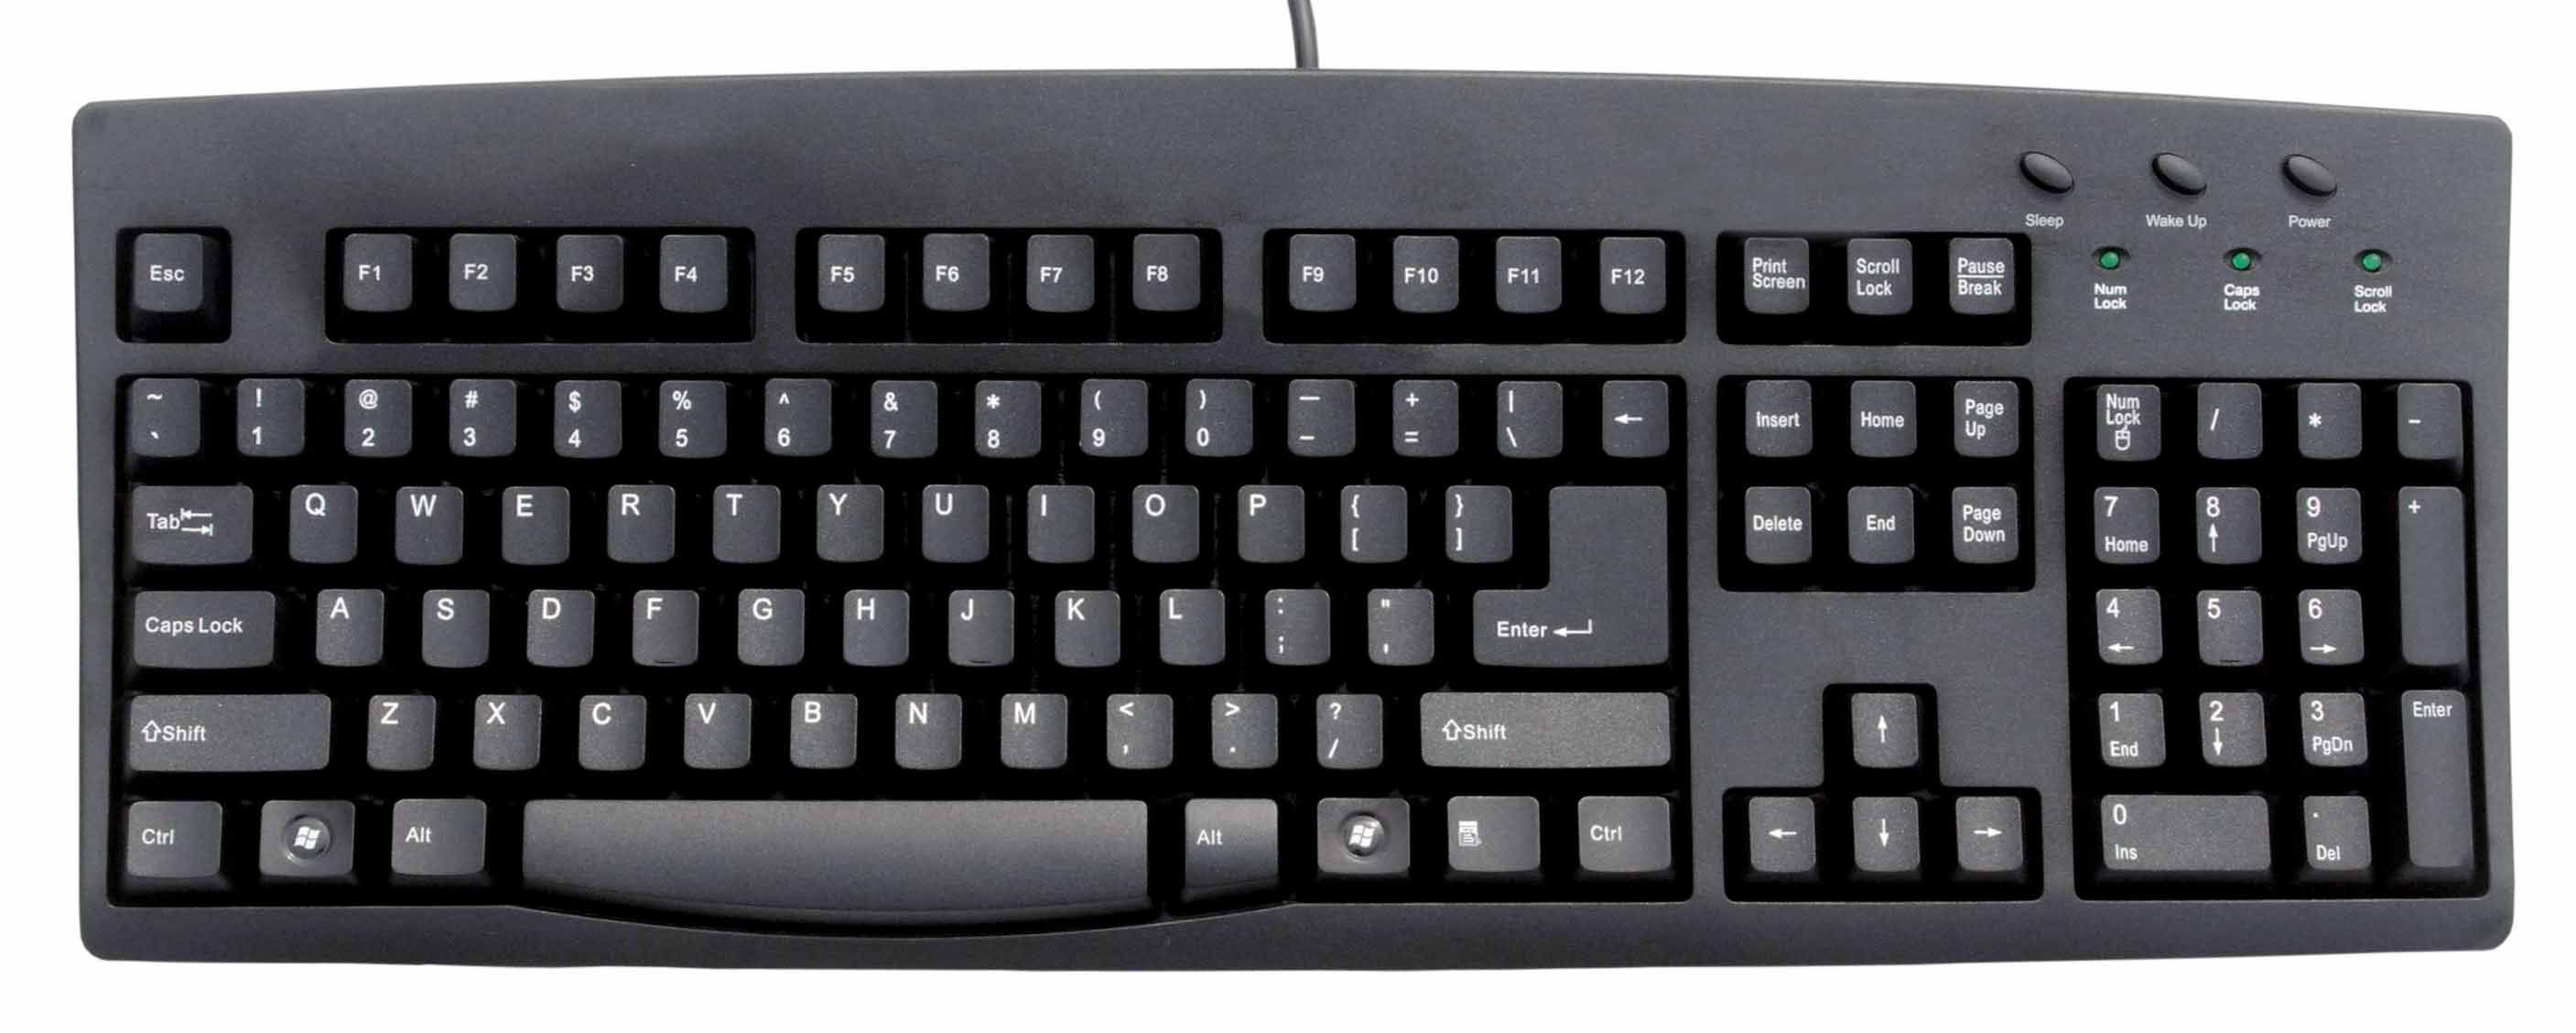 The Computer Keyboard Keyguard Is Especially Designed For Computer